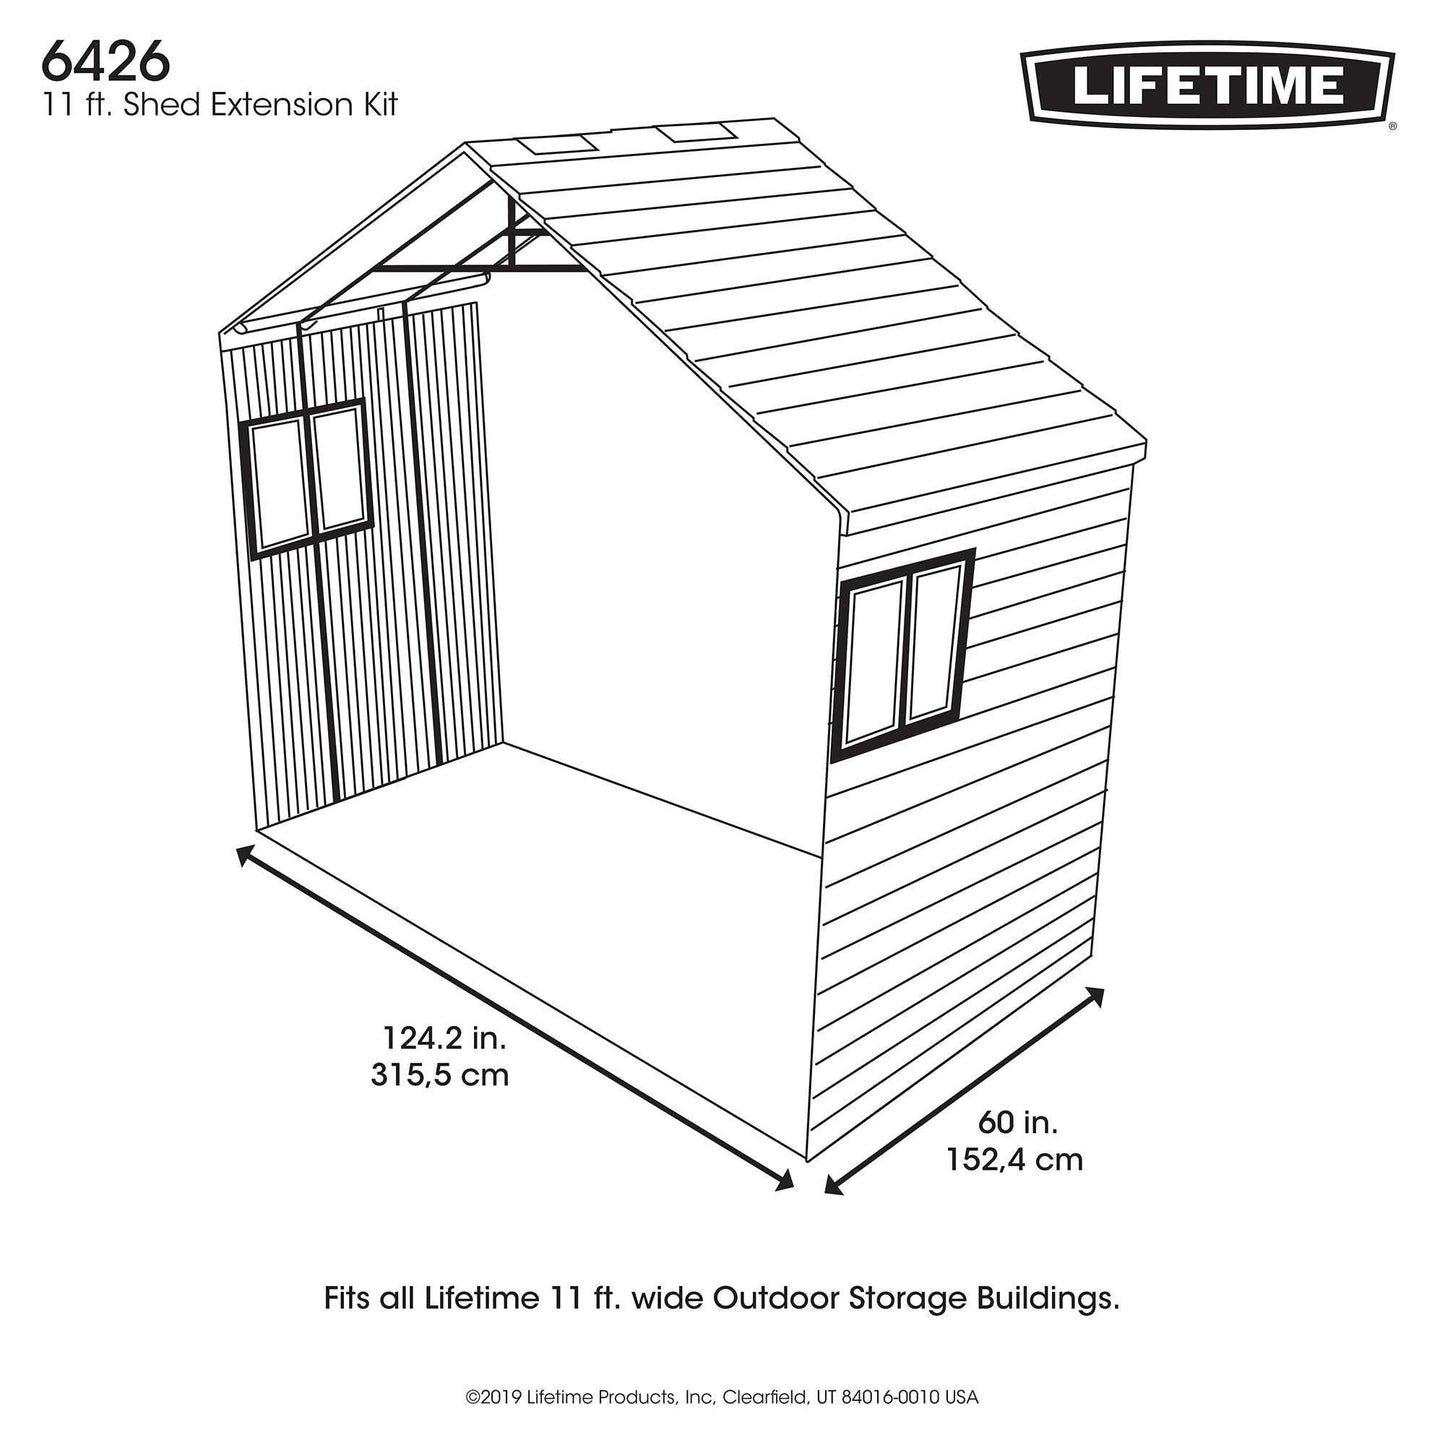 Lifetime 60236 11 x 18.5 Ft. Outdoor Storage Shed, 11 x 18.5, Desert Sand & 6426 60 Inch Extension Kit for 11 Foot Sheds, 2 Windows Included, Desert Sand 11 x 18.5 Ft. Outdoor Storage Shed + Extension Kit